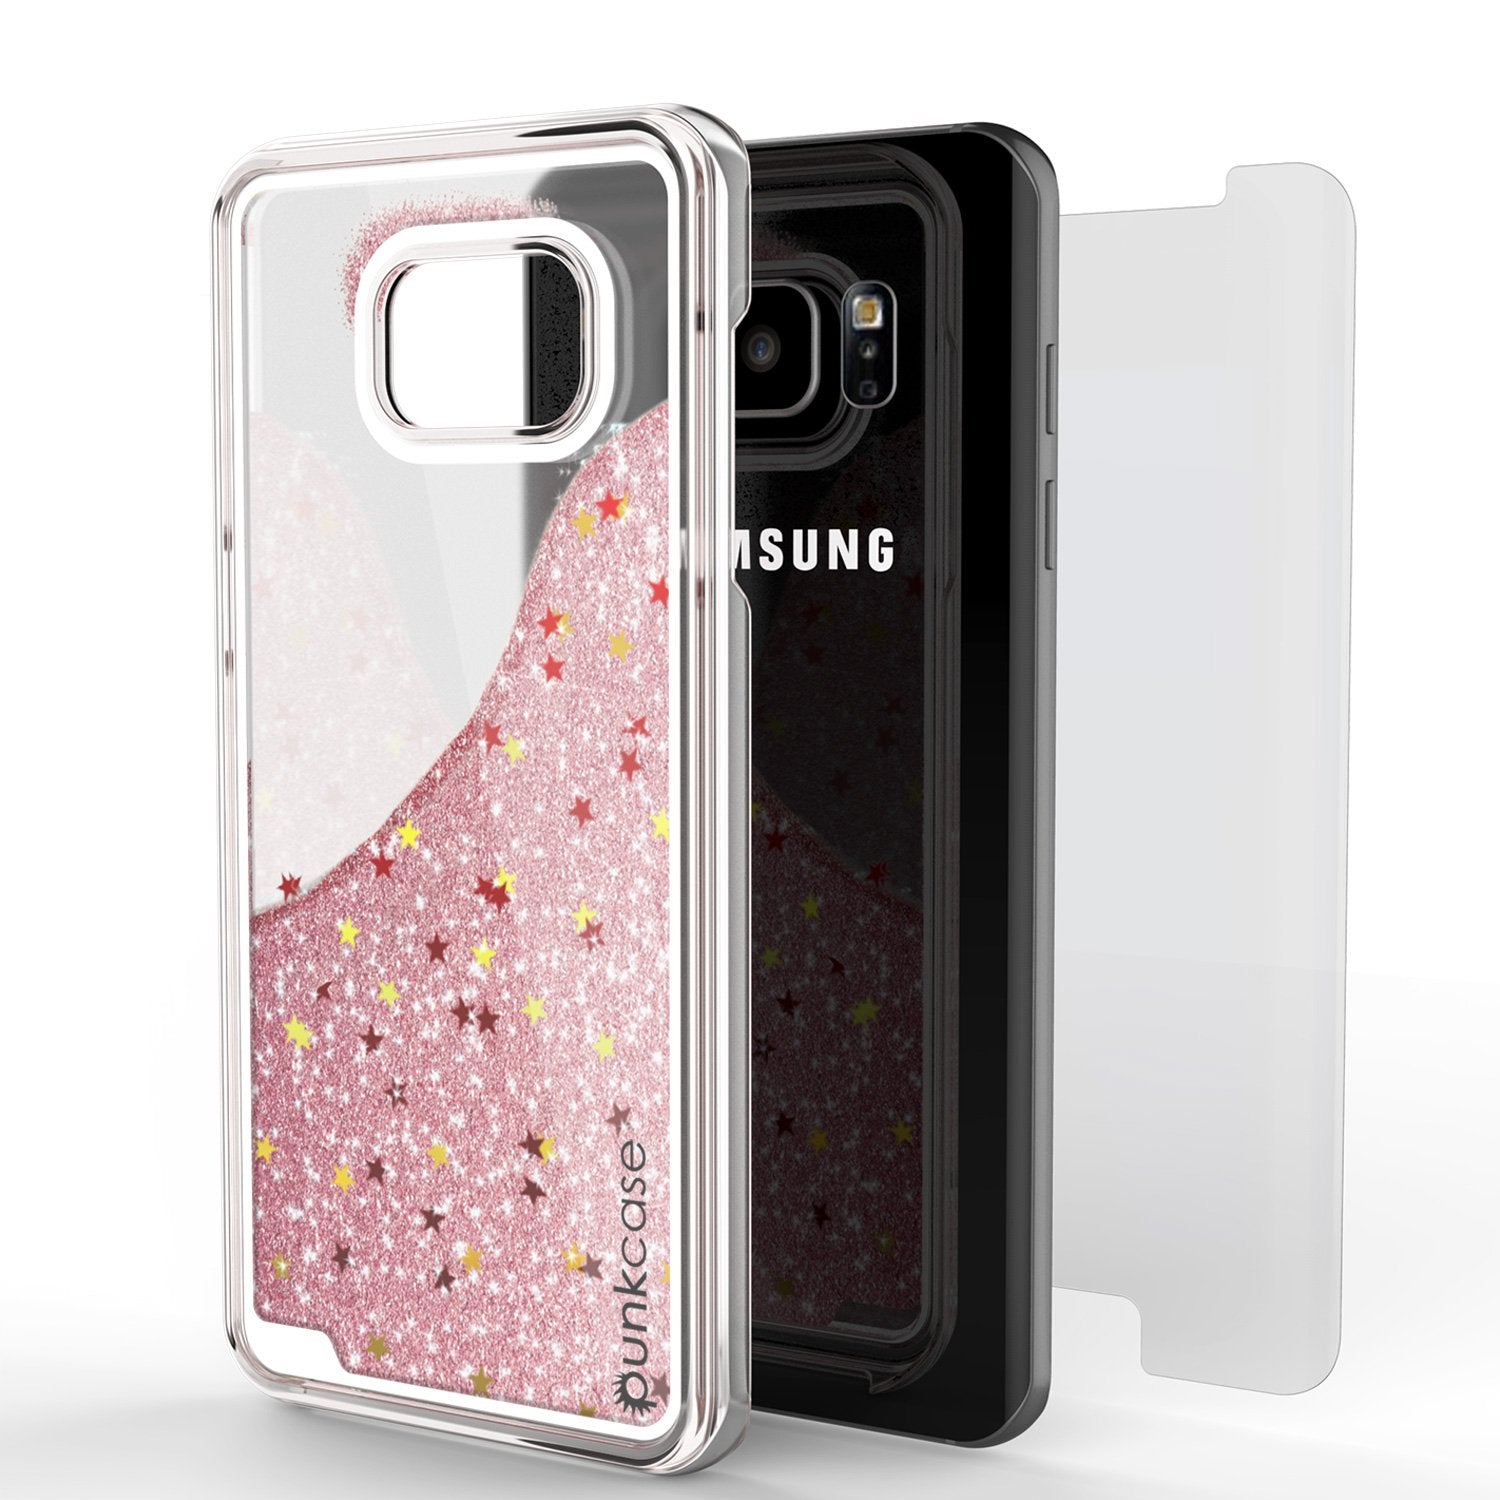 S7 Edge Case, Punkcase [Liquid Rose Series] Protective Dual Layer Floating Glitter Cover with lots of Bling & Sparkle + PunkShield Screen Protector - PunkCase NZ